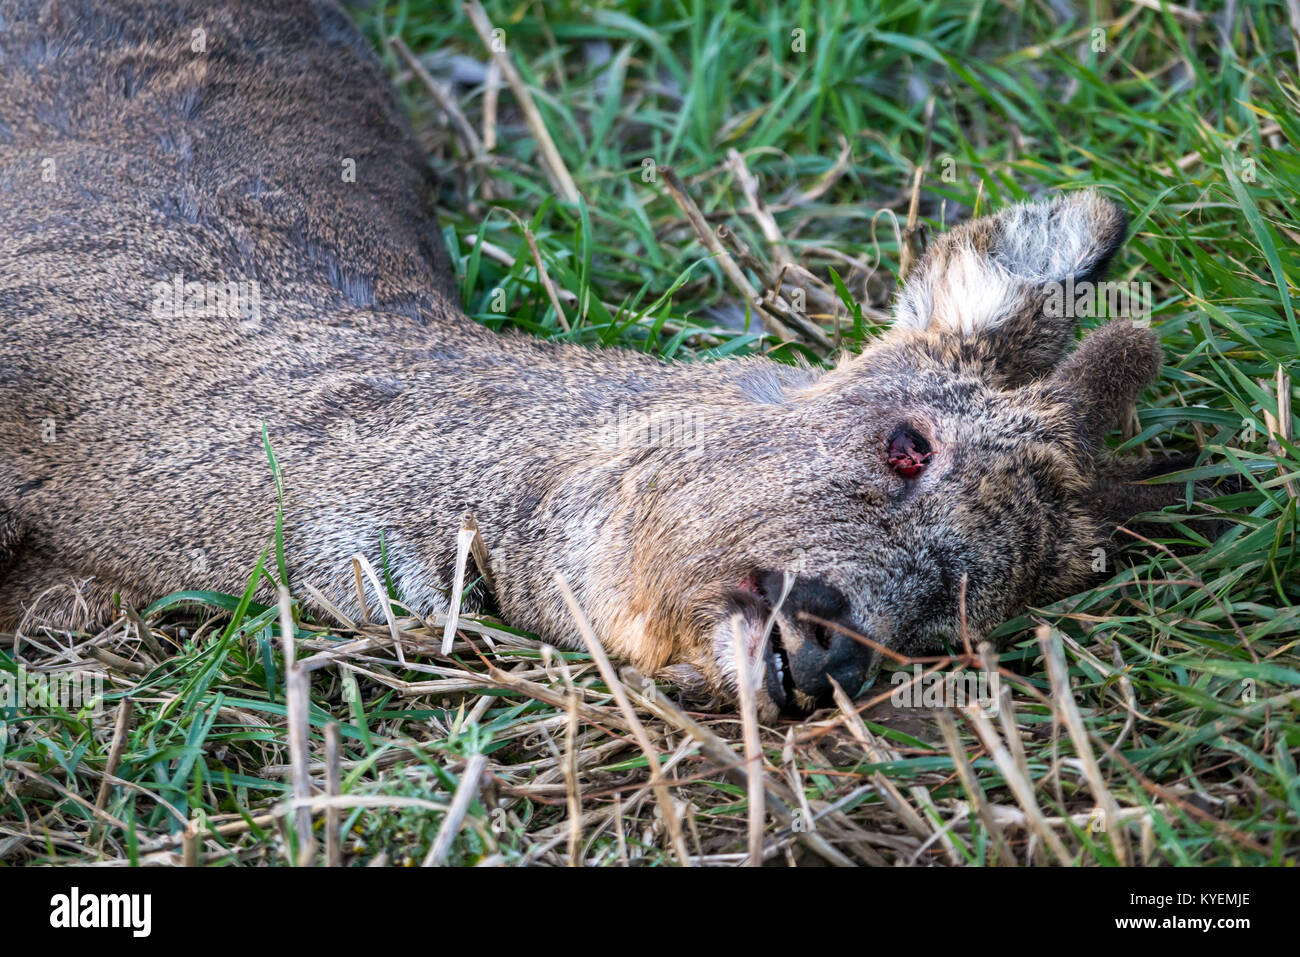 Close up of dead roe deer, Capreolus capreolus, lying in grassy field, with eye pecked out by birds, East Lothian, Scotland, UK Stock Photo